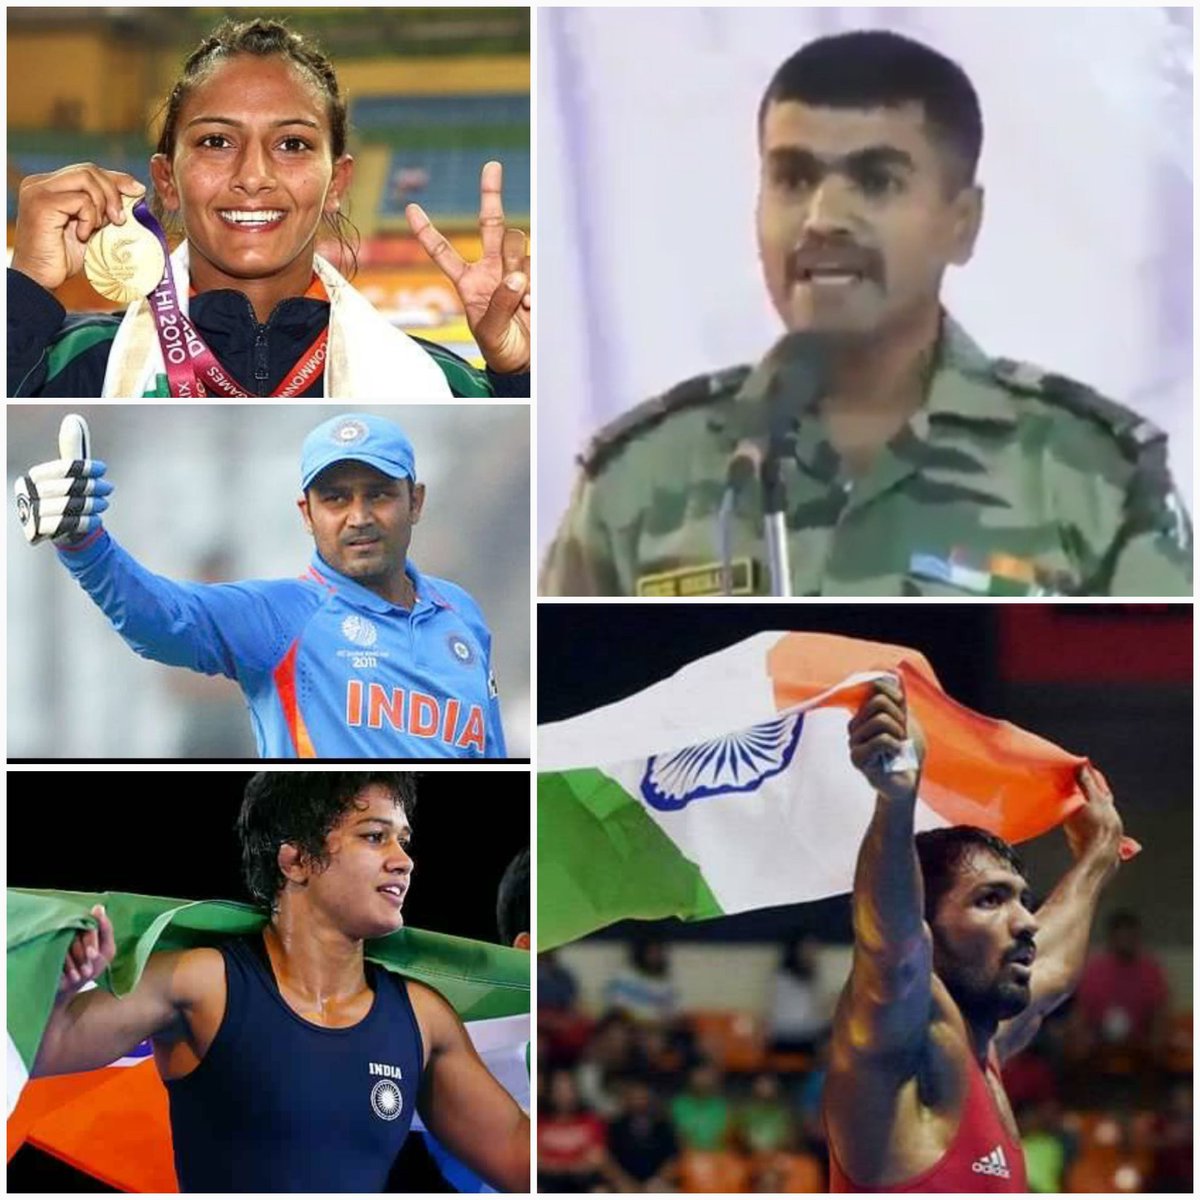 Whoever defends & represents India is a hero. May be a soldier, sportsperson, scientist, teacher, farmer, doctor, engineer, labourer, trader